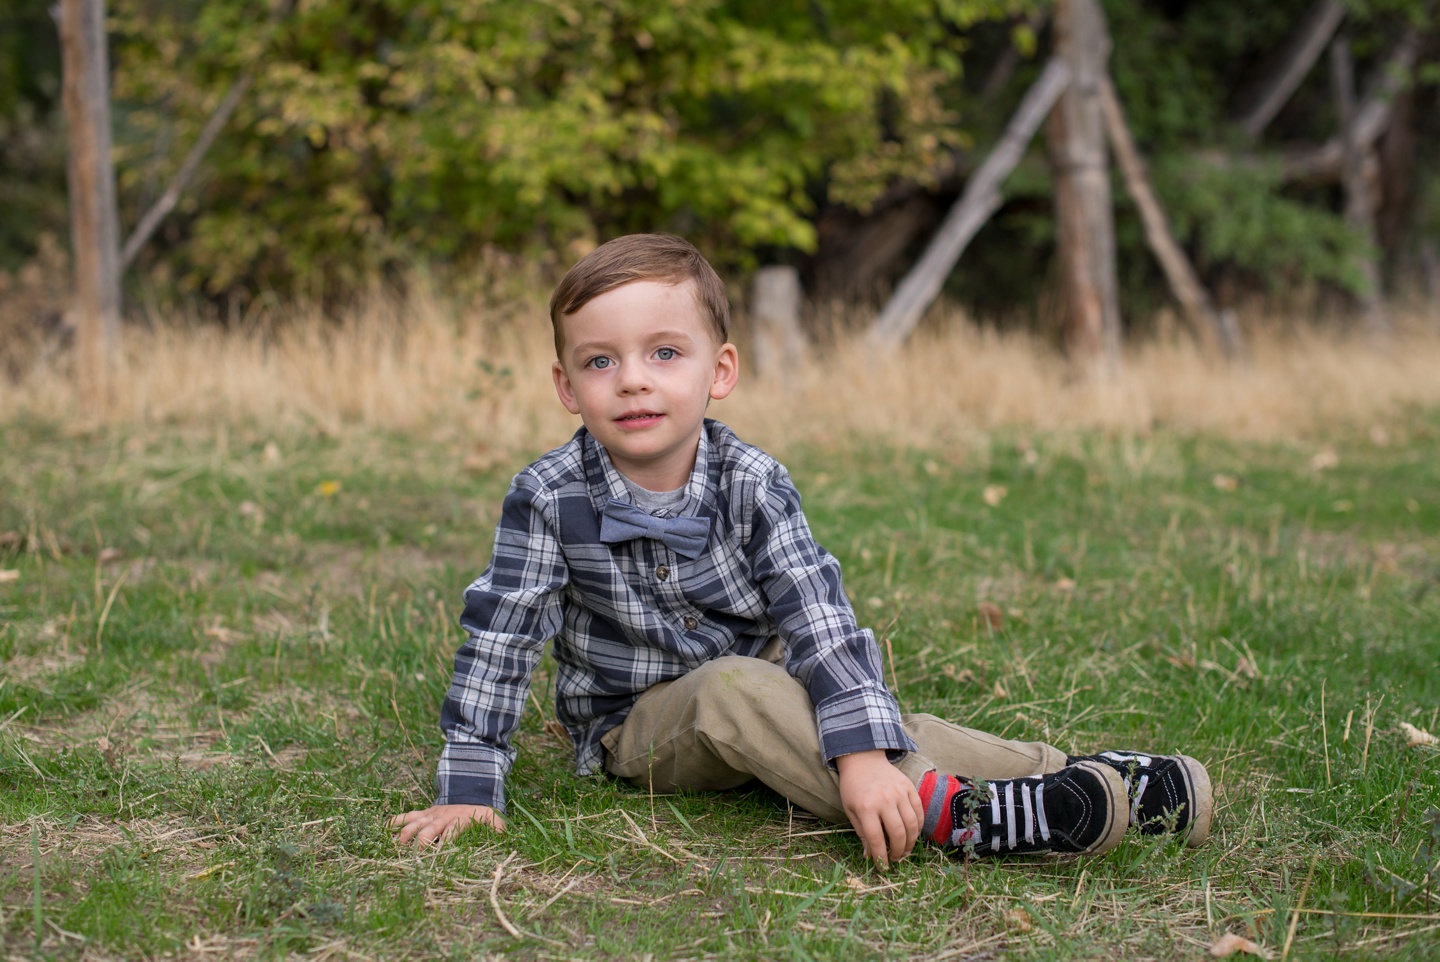 DAmico family photoshoot by The Aperture Company Photographers in Utah